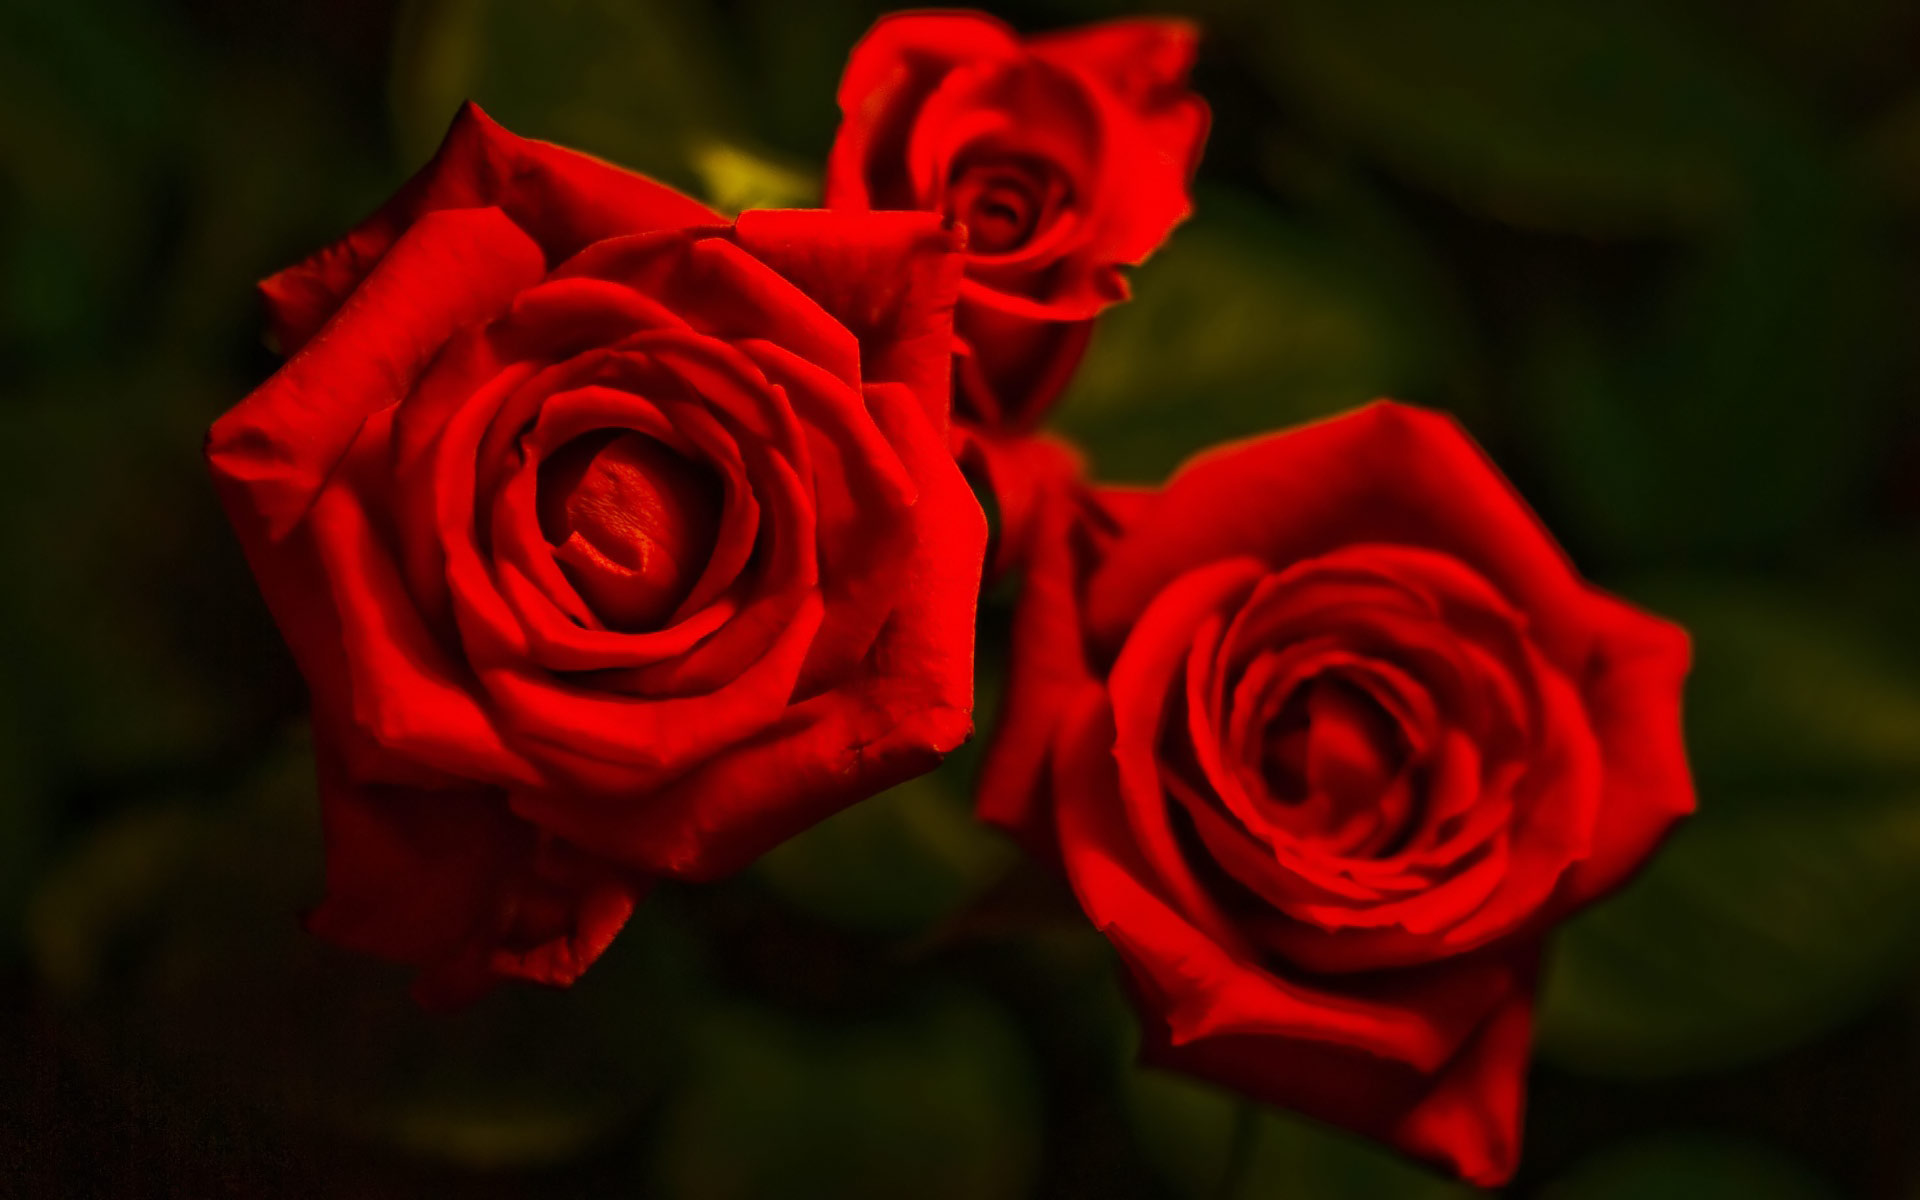 1920x1200 px Red Rose Widescreen Image – Most Beautiful Backgrounds ...